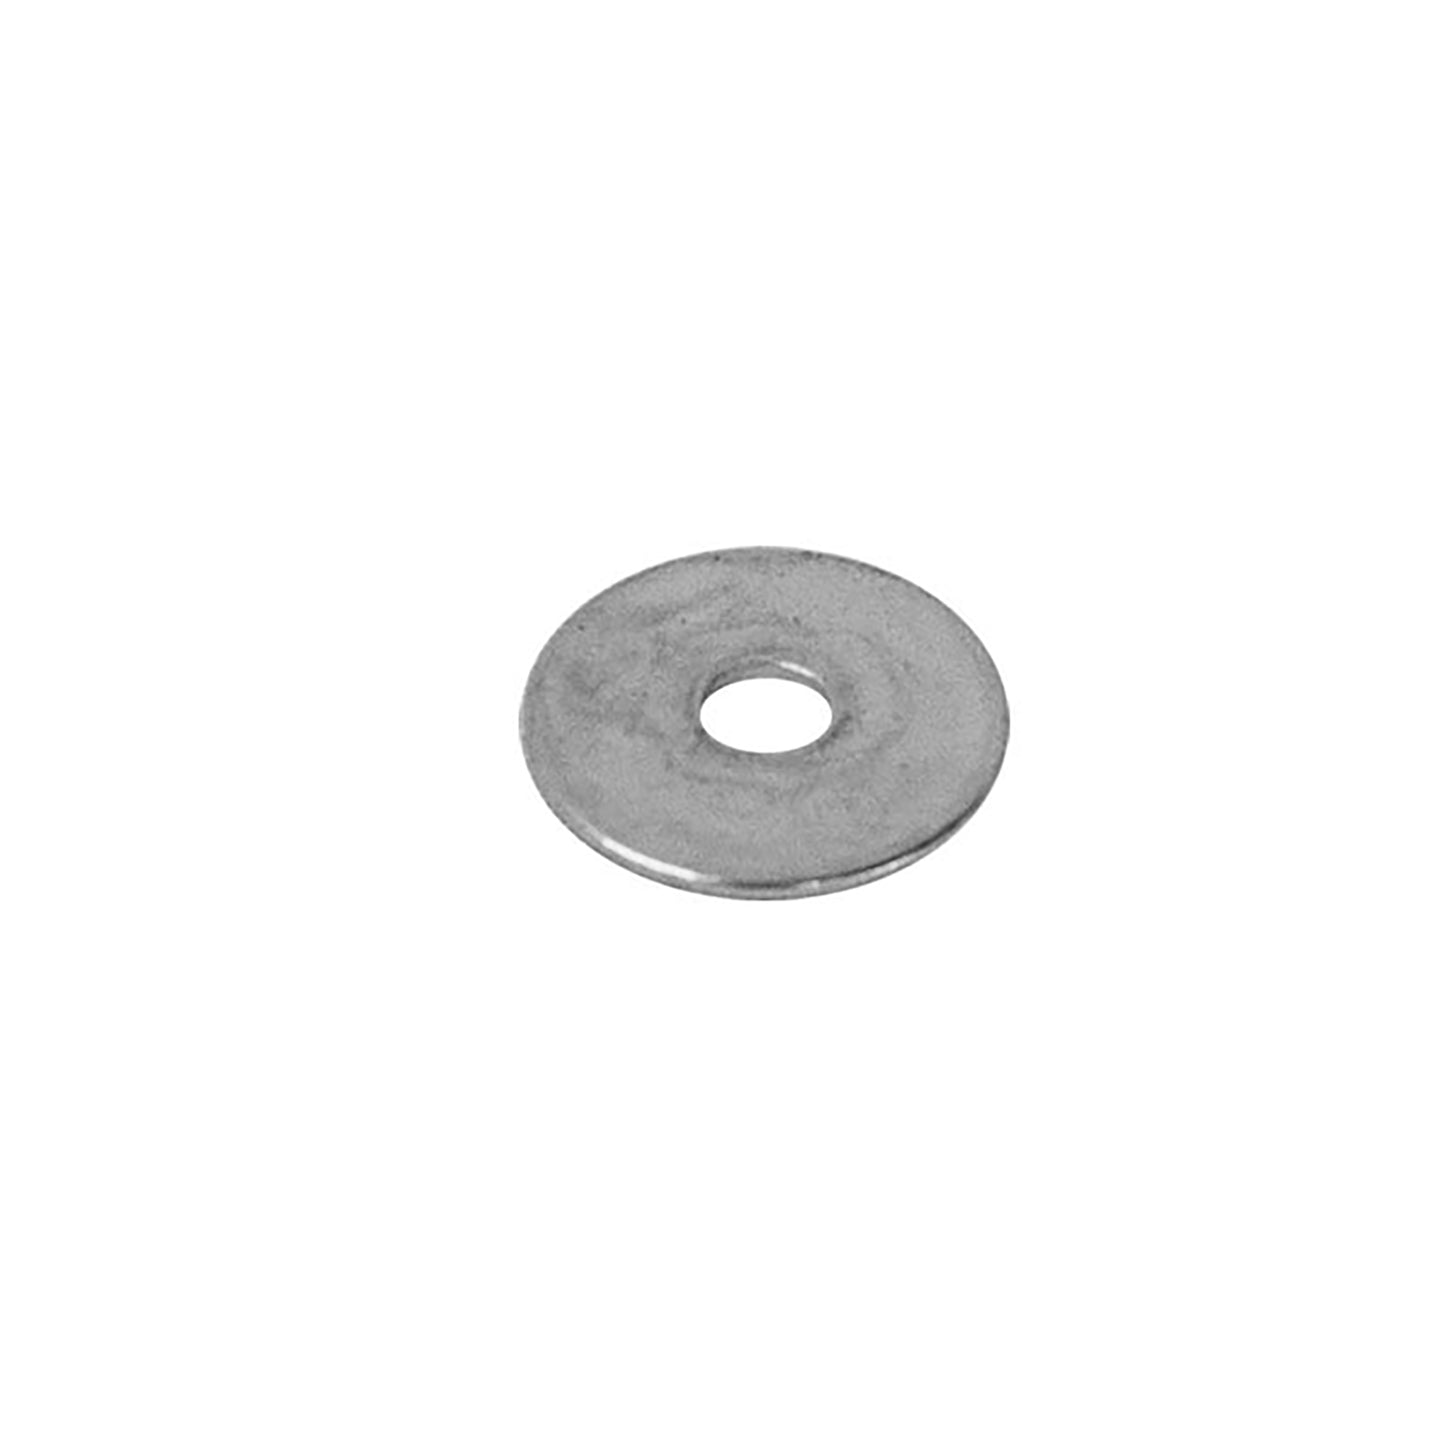 5.4 Flat Washer for Fan Assembly for BR-282A Inflatable Blower